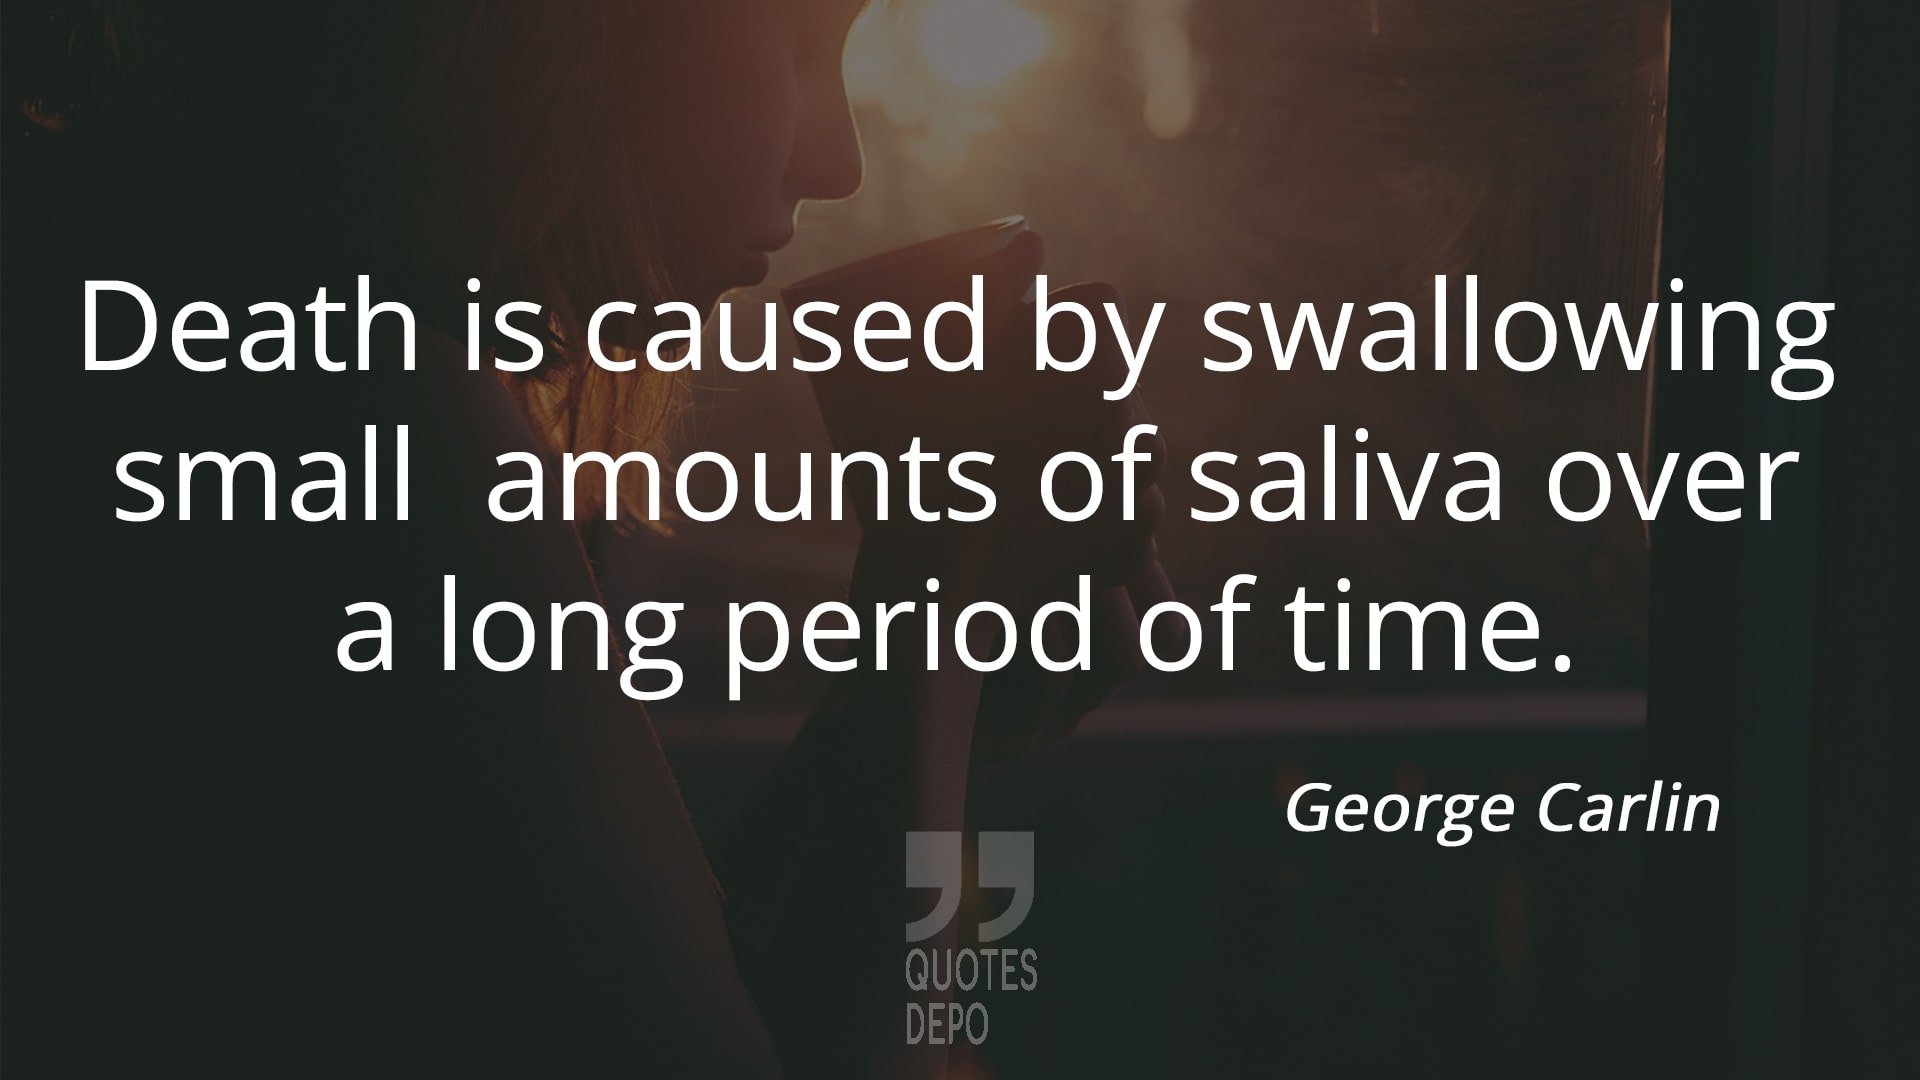 death is caused by swallowing small amounts of saliva - george carlin quotes